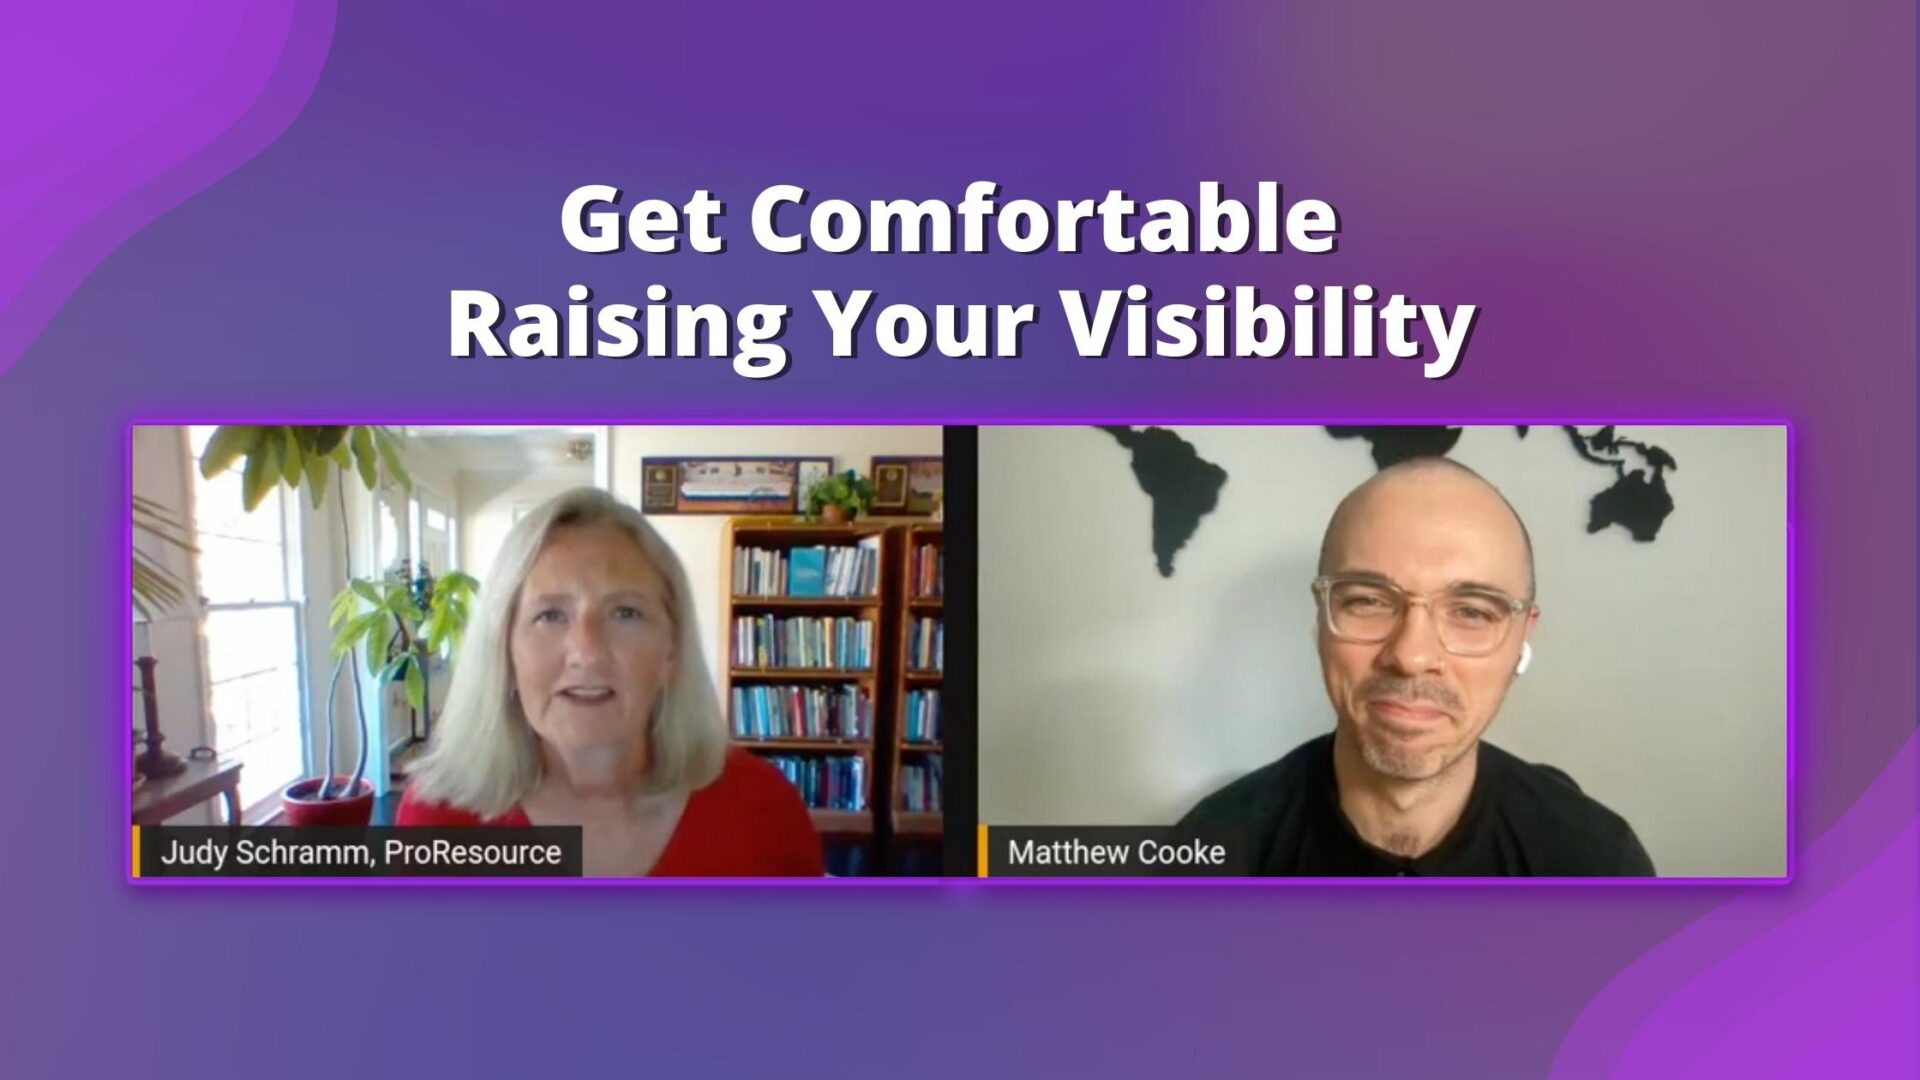 Get Comfortable Raising Your Visibility blog cover image